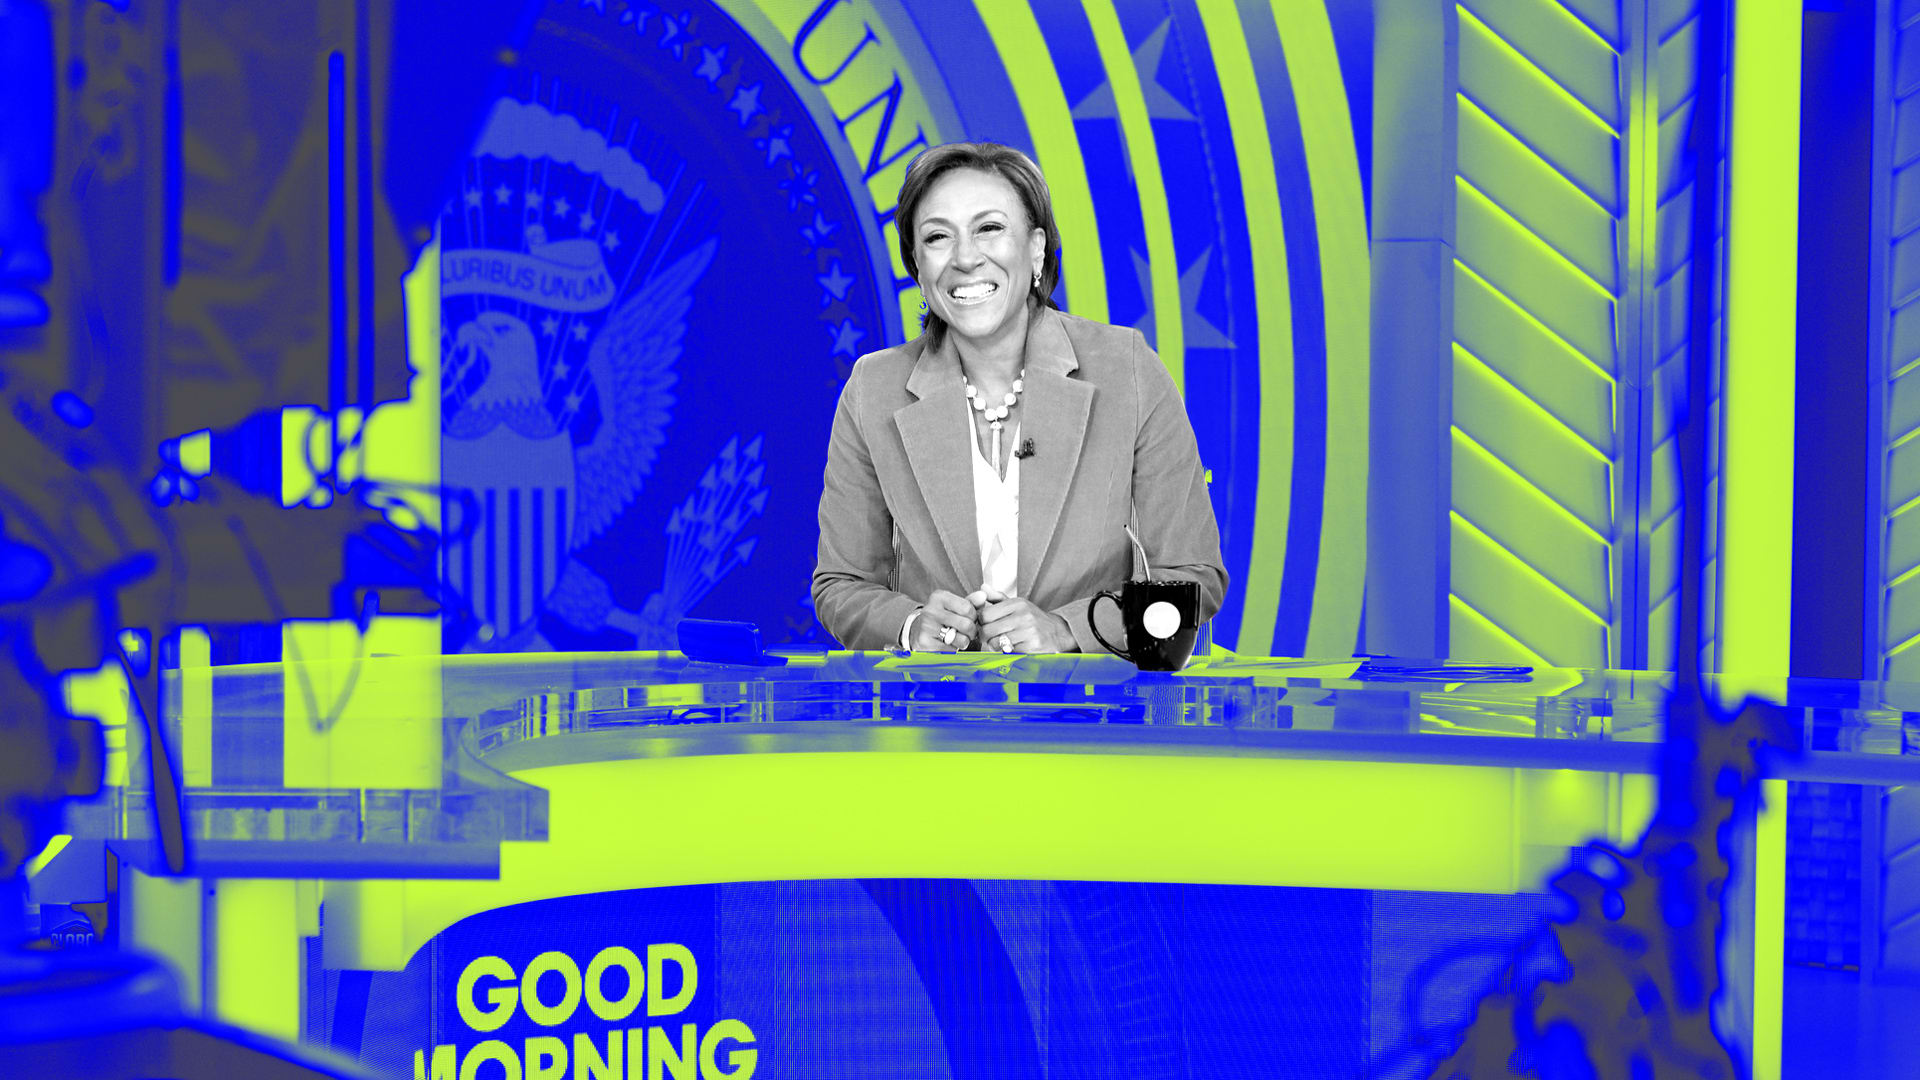 ‘GMA’ anchor Robin Roberts’s lessons in storytelling, leadership, and purpose